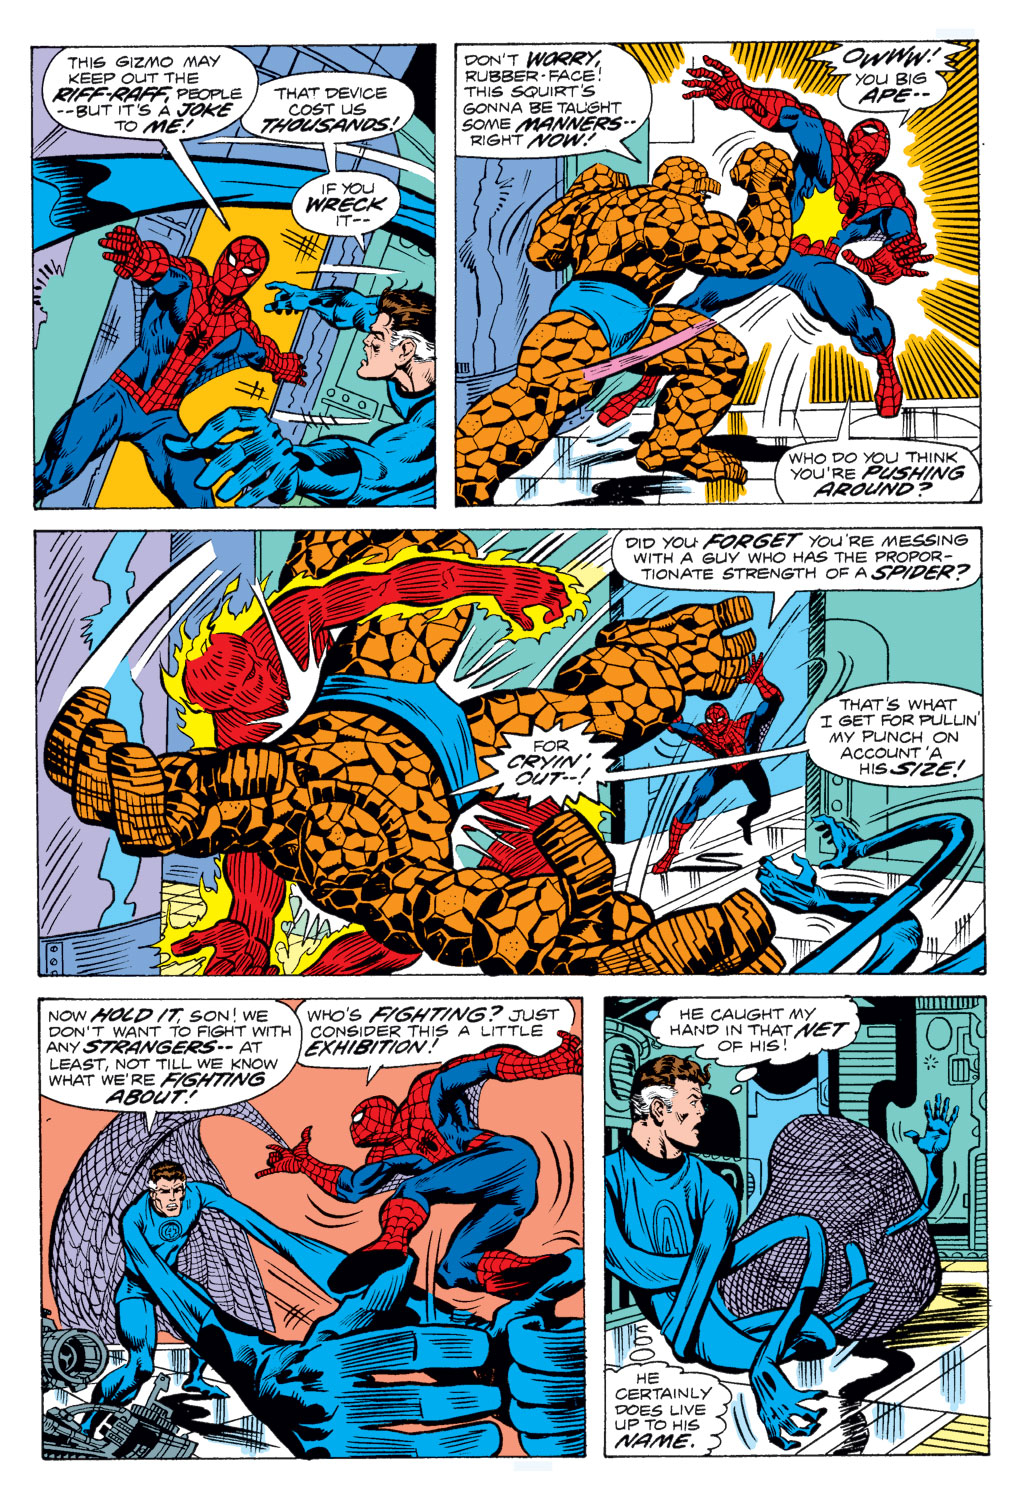 What If? (1977) issue 1 - Spider-Man joined the Fantastic Four - Page 8